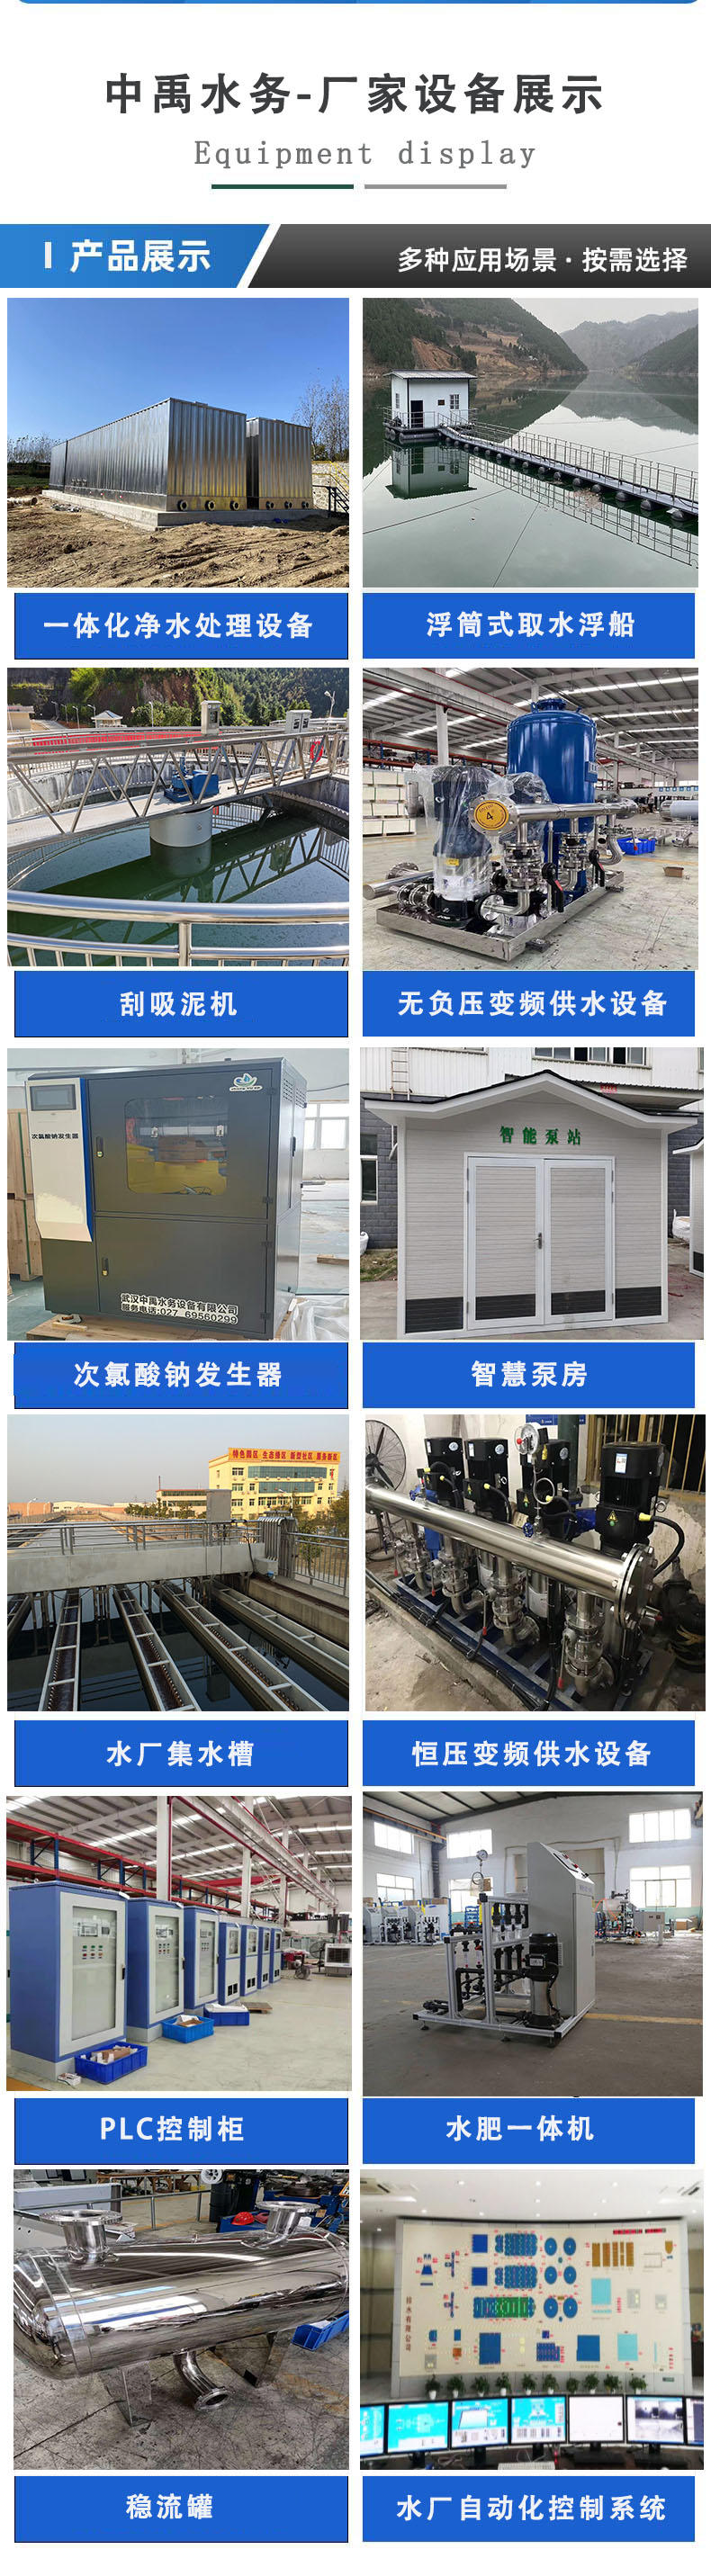 Integrated rural drinking water Water filter, urban and rural drinking water supply equipment of Zhongyu Water, 70t/h SUS304